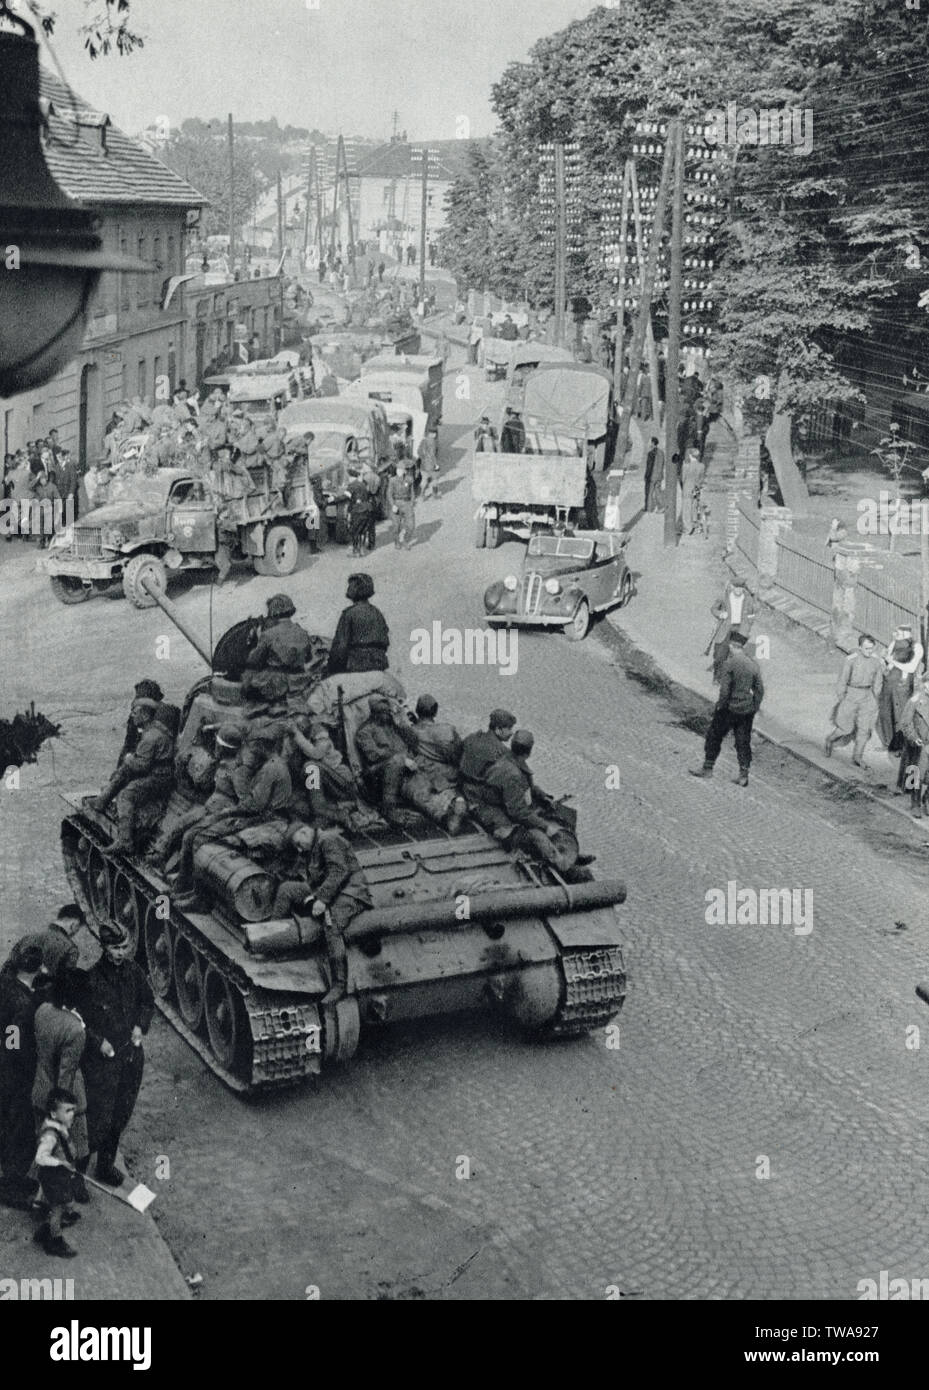 Red Army tank T-34 in Hrdlořezy district in Prague, Czechoslovakia, in May 1945. Black and white photograph by Czech photographer A. Řimal published in the Czechoslovak book 'For the Eternal Times' ('Na věčné časy') issued in 1959. Courtesy of the Azoor Photo Collection. Stock Photo